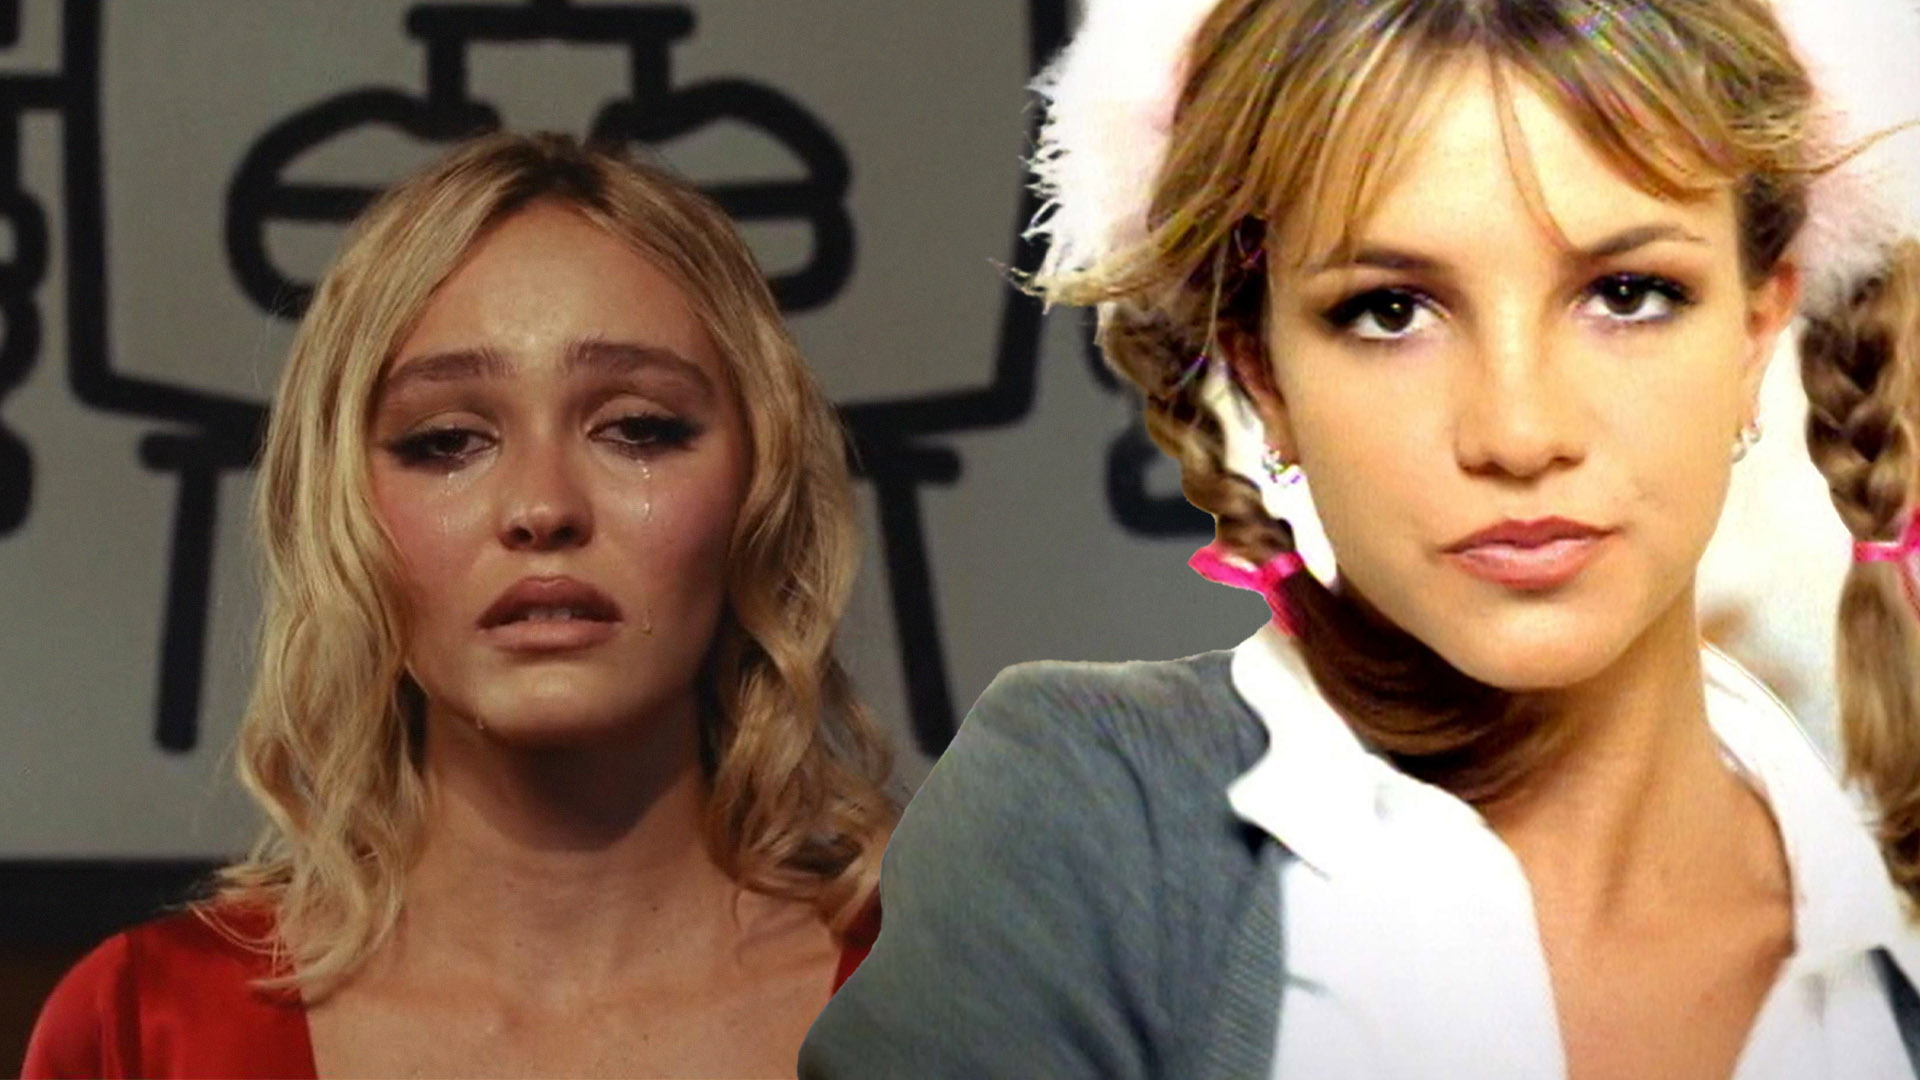 Is Lily Rose-Depp's The Idol Character Modelled After Britney Spears?